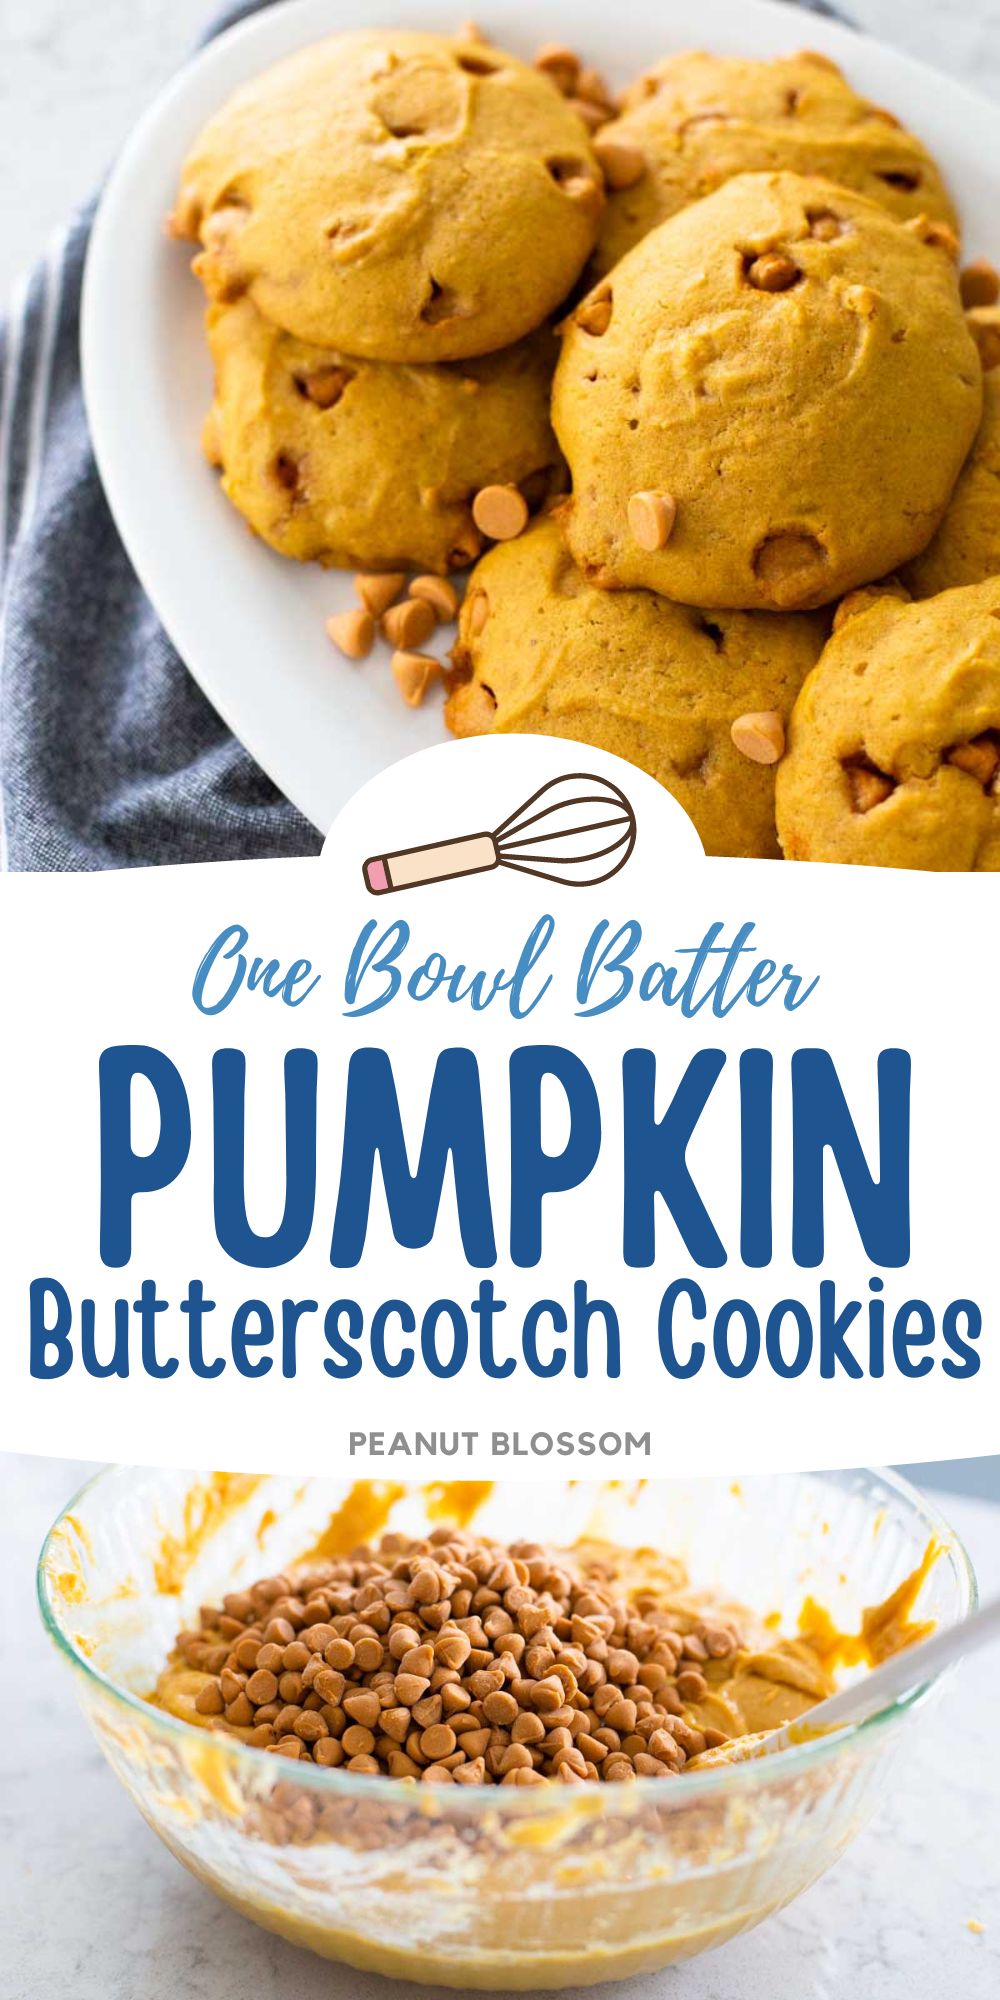 The photo collage shows the pumpkin cookies on the platter next to a photo of the one bowl used to mix up the batter with butterscotch chips on top.